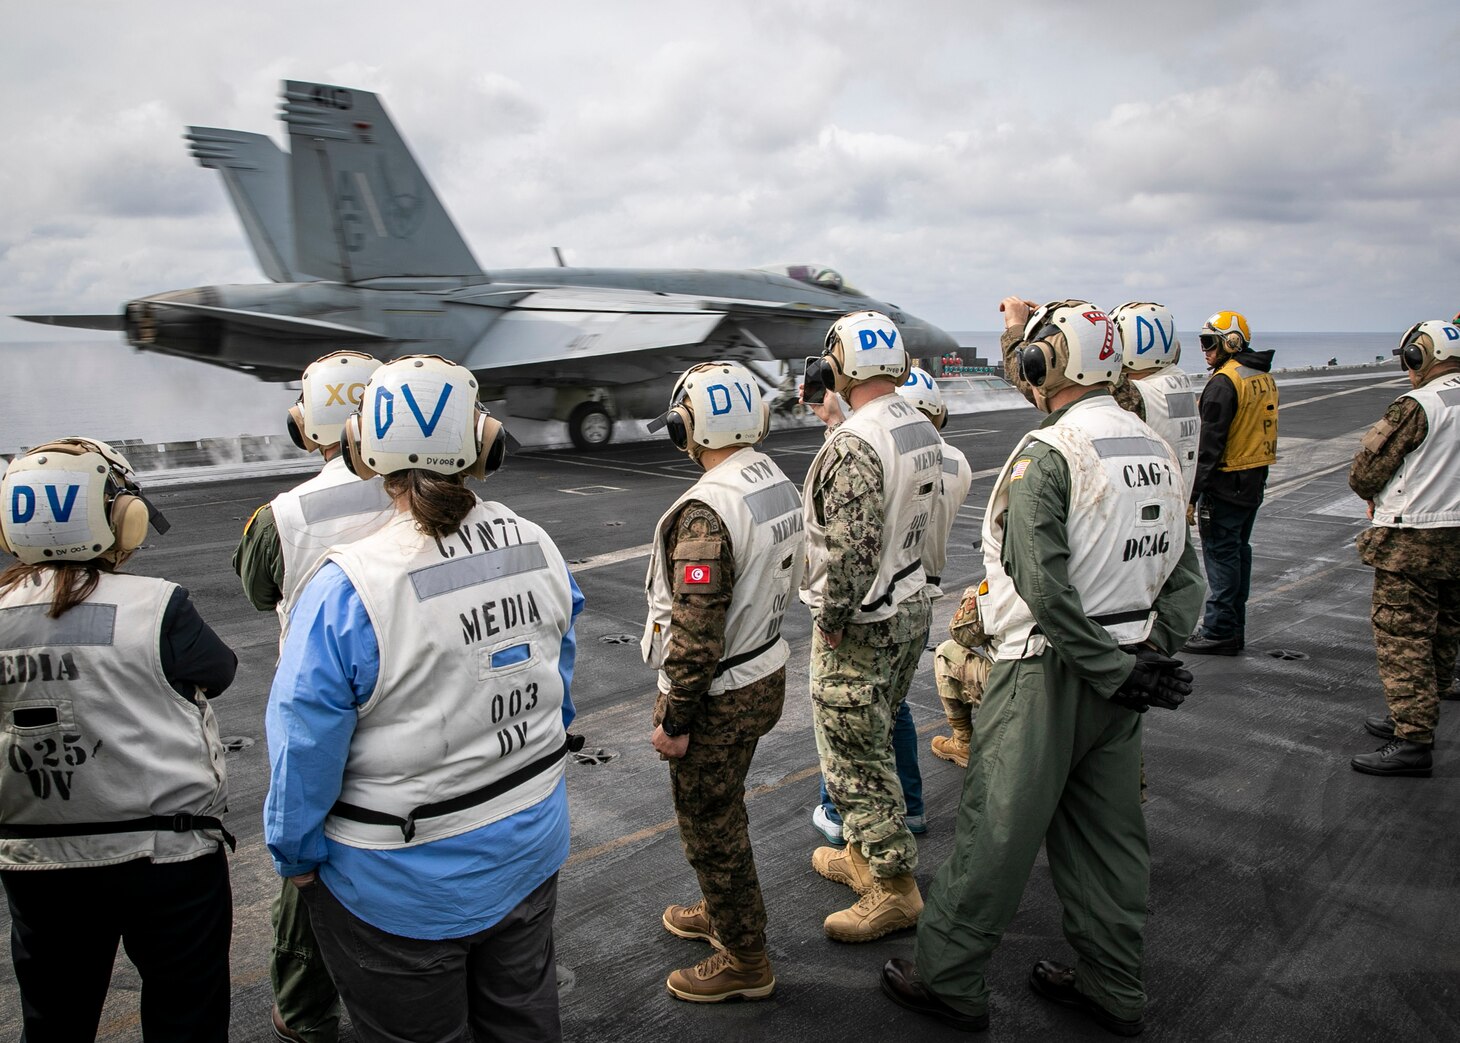 TYRRHENIAN SEA (March 22, 2023) Distinguished visitors watch an F/A-18E Super Hornet aircraft, attached to Strike Fighter Squadron (VFA) 136, launch from the flight deck of the Nimitz-class aircraft carrier USS George H.W. Bush (CVN 77), March 22, 2023. Carrier Air Wing (CVW) 7 is the offensive air and strike component of Carrier Strike Group (CSG) 10 and the George H.W. Bush CSG. The squadrons of CVW-7 are VFA-143, VFA-103, VFA-86, VFA-136, Carrier Airborne Early Warning Squadron (VAW) 121, Electronic Attack Squadron (VAQ) 140, Helicopter Sea Combat Squadron (HSC) 5, and Helicopter Maritime Strike Squadron (HSM) 46. The George H.W. Bush CSG is on a scheduled deployment in the U.S. Naval Forces Europe area of operations, employed by U.S. Sixth Fleet to defend U.S., allied and partner interests.